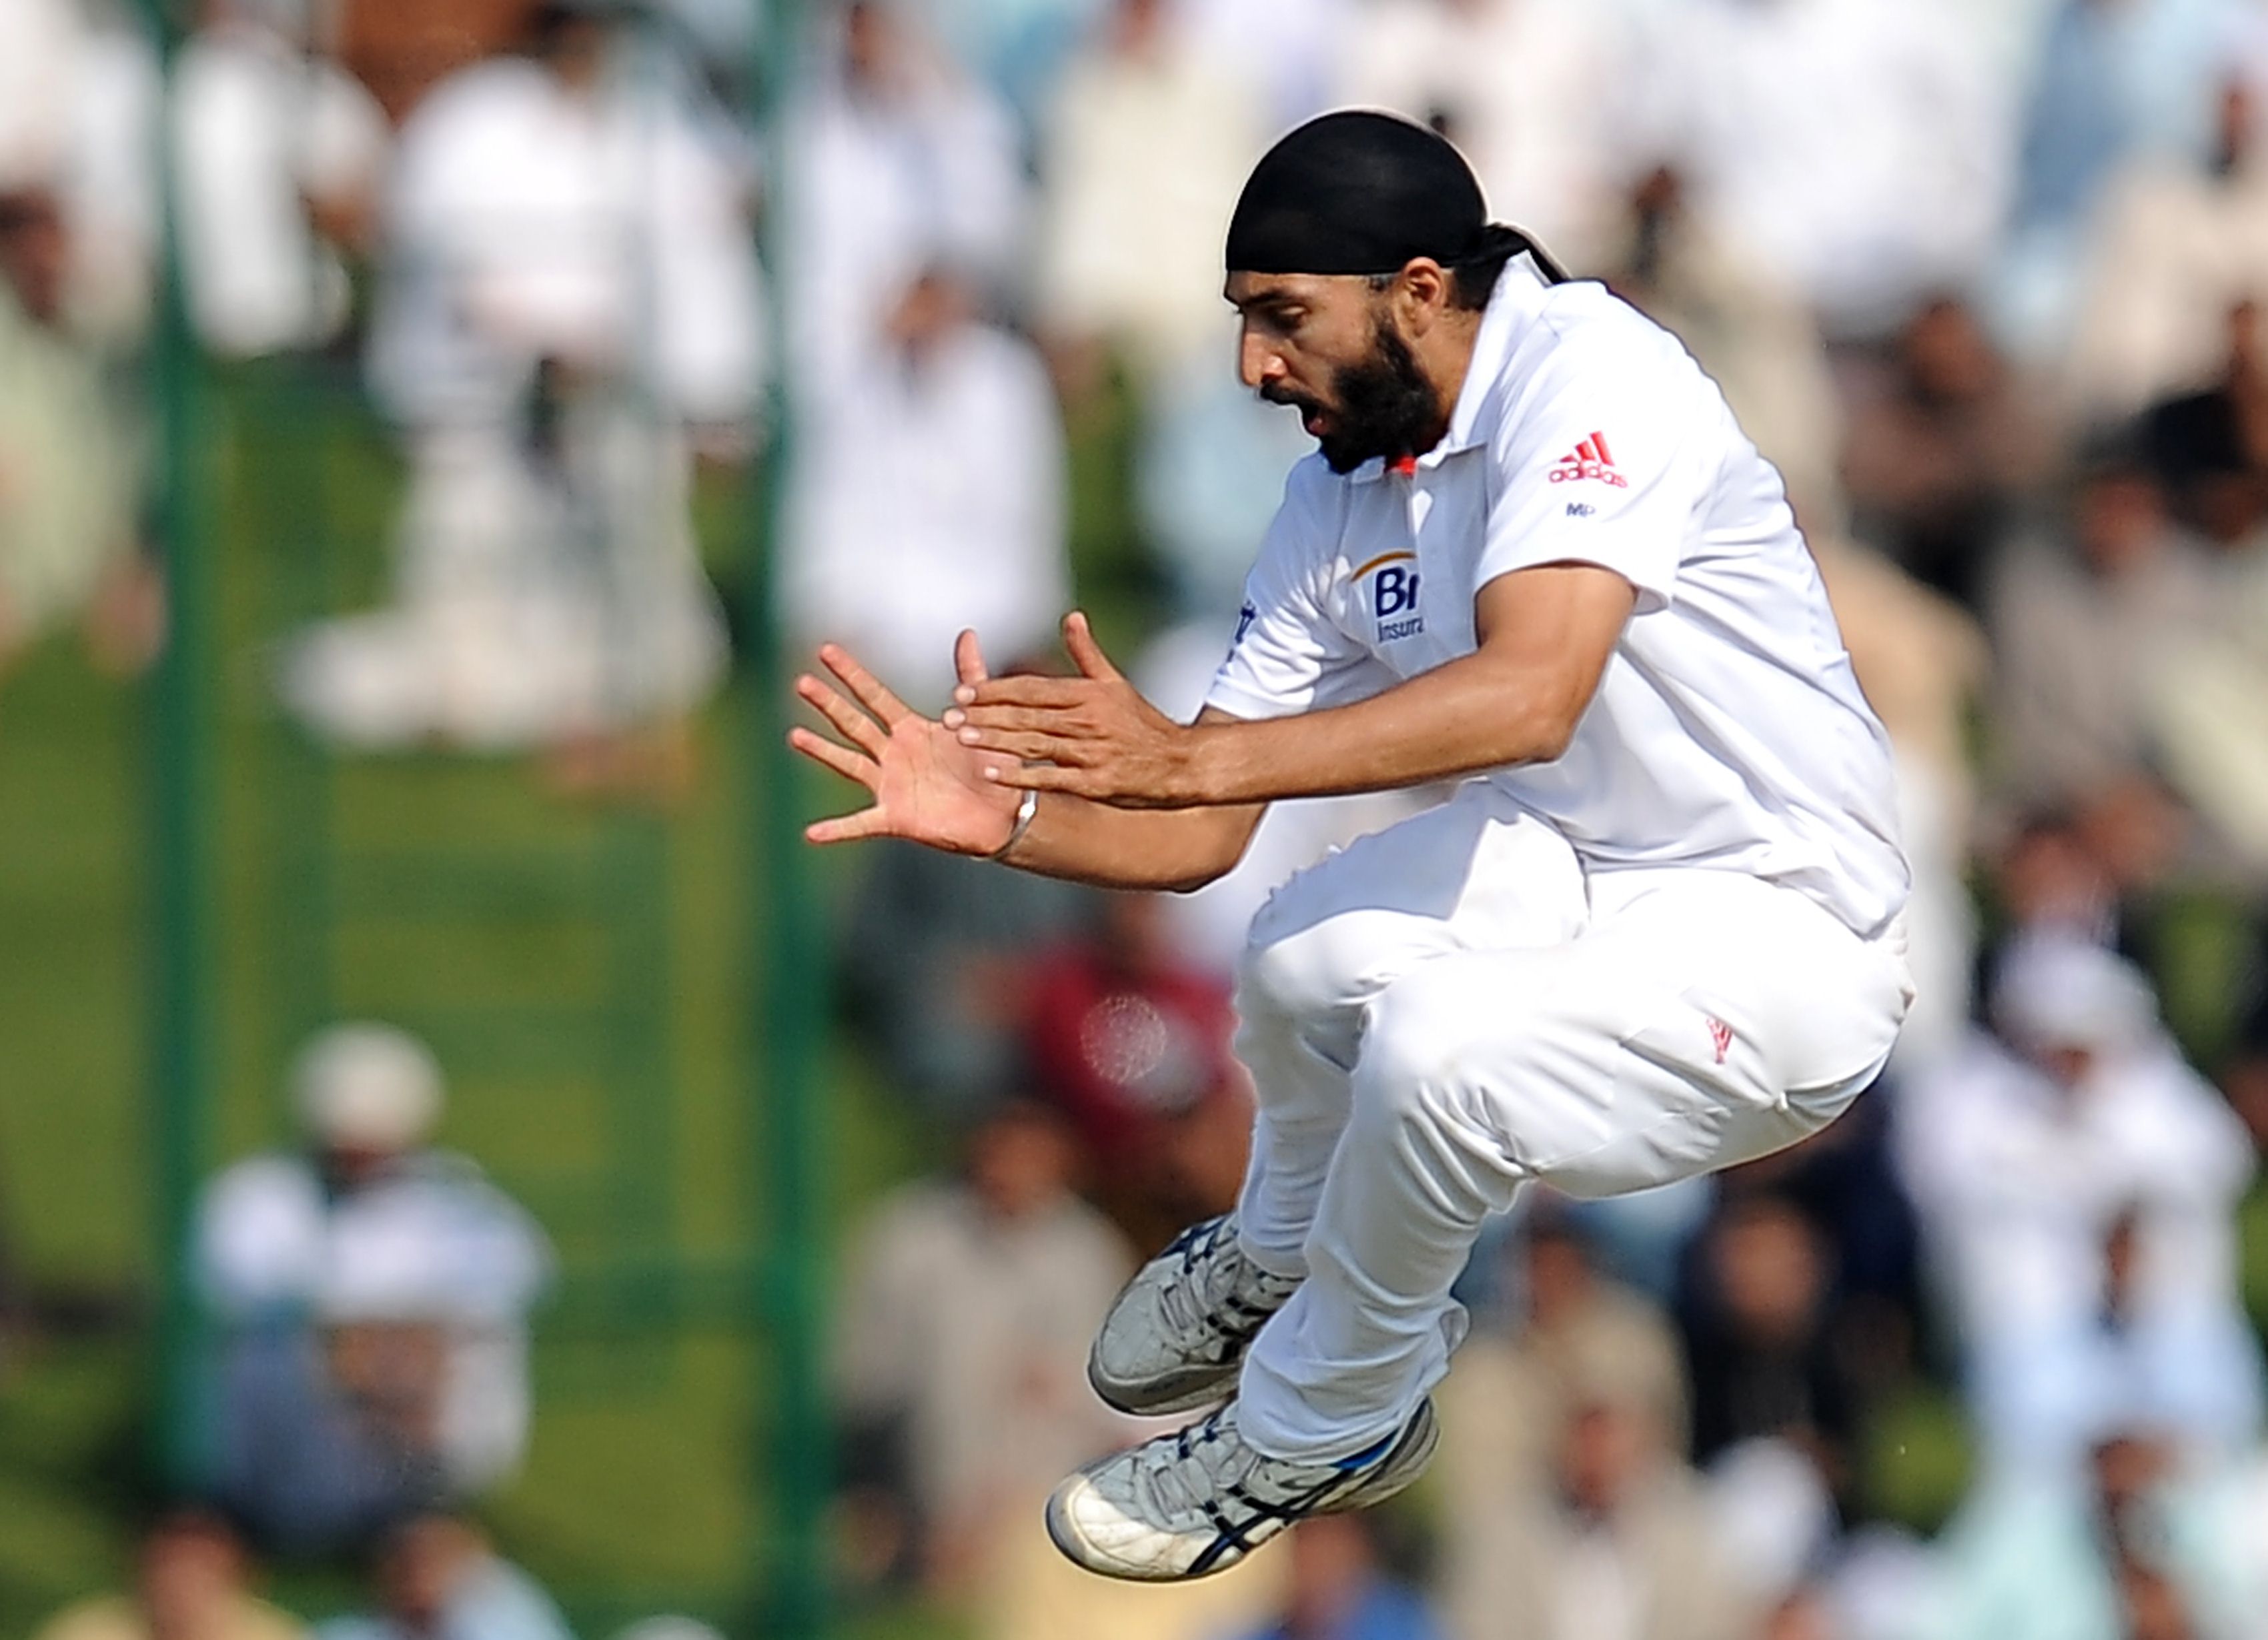 Monty Panesar has promised selectors he has put his problems behind him. Photo: AFP